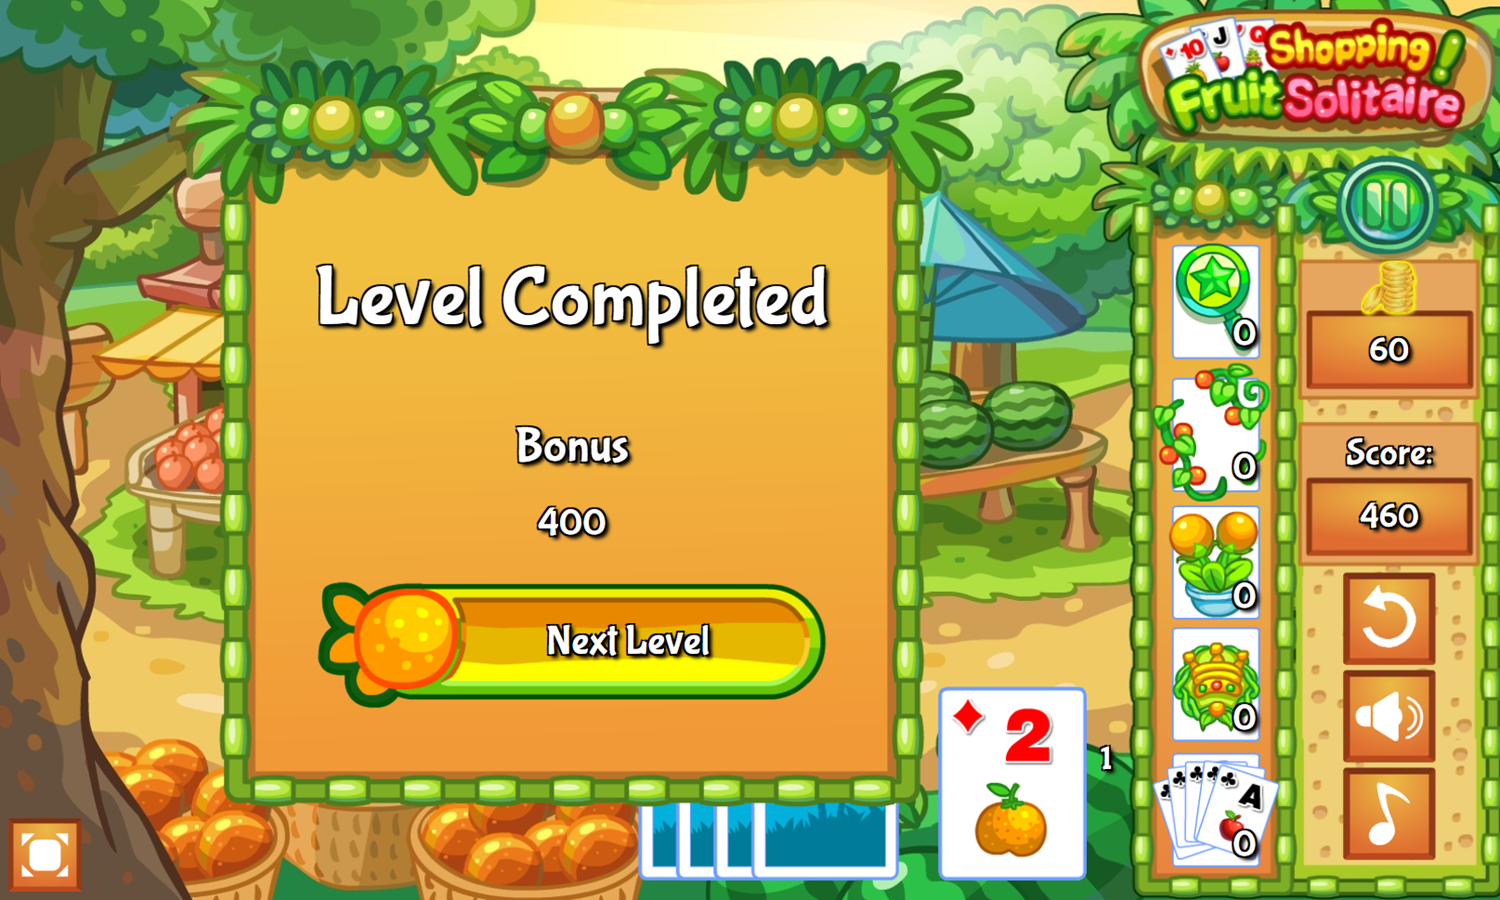 Tri-Fruit Solitaire Game Level Completed Screenshot.